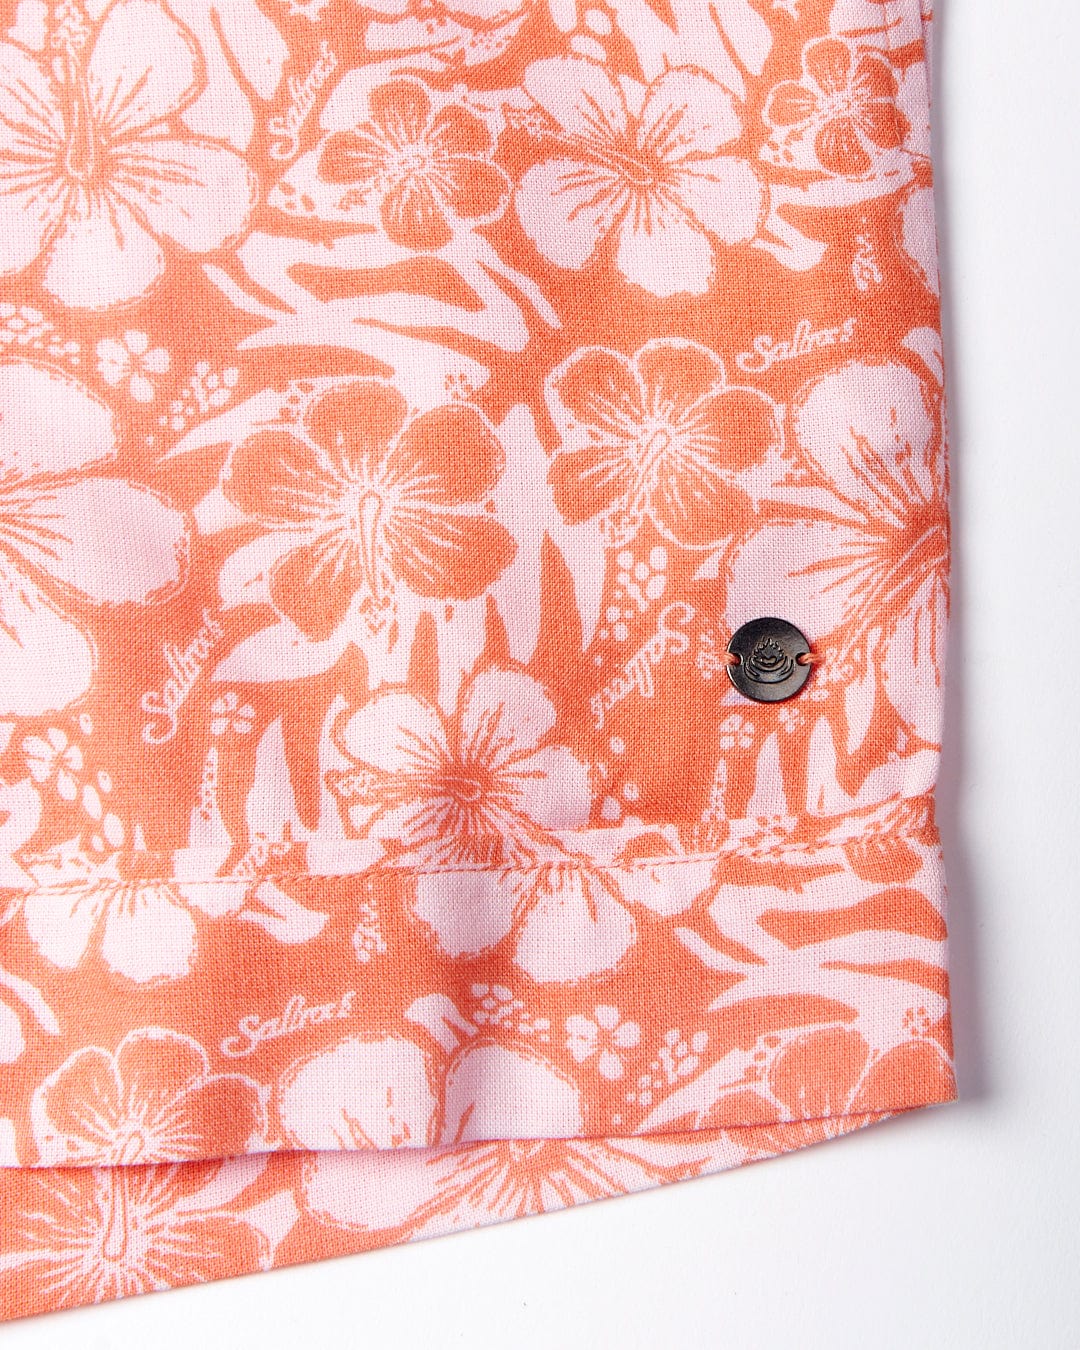 Close-up of a fabric with a pink and white hibiscus floral pattern featuring the Saltrock logo, and a black button on a cuff.